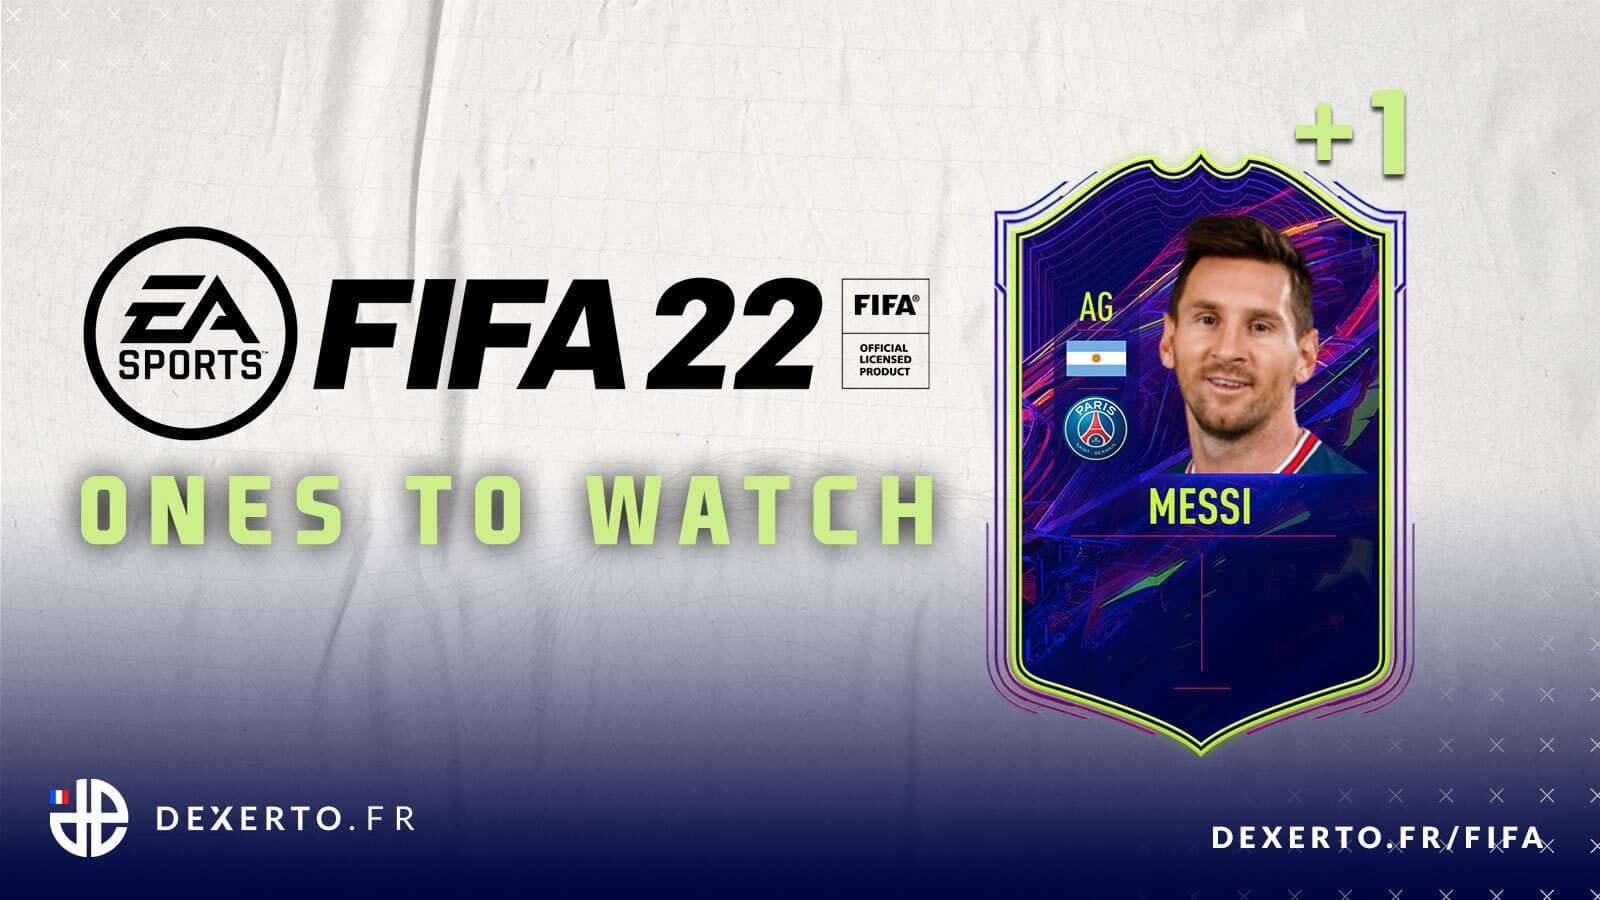 FIFA 22 Ones to Watch Messi